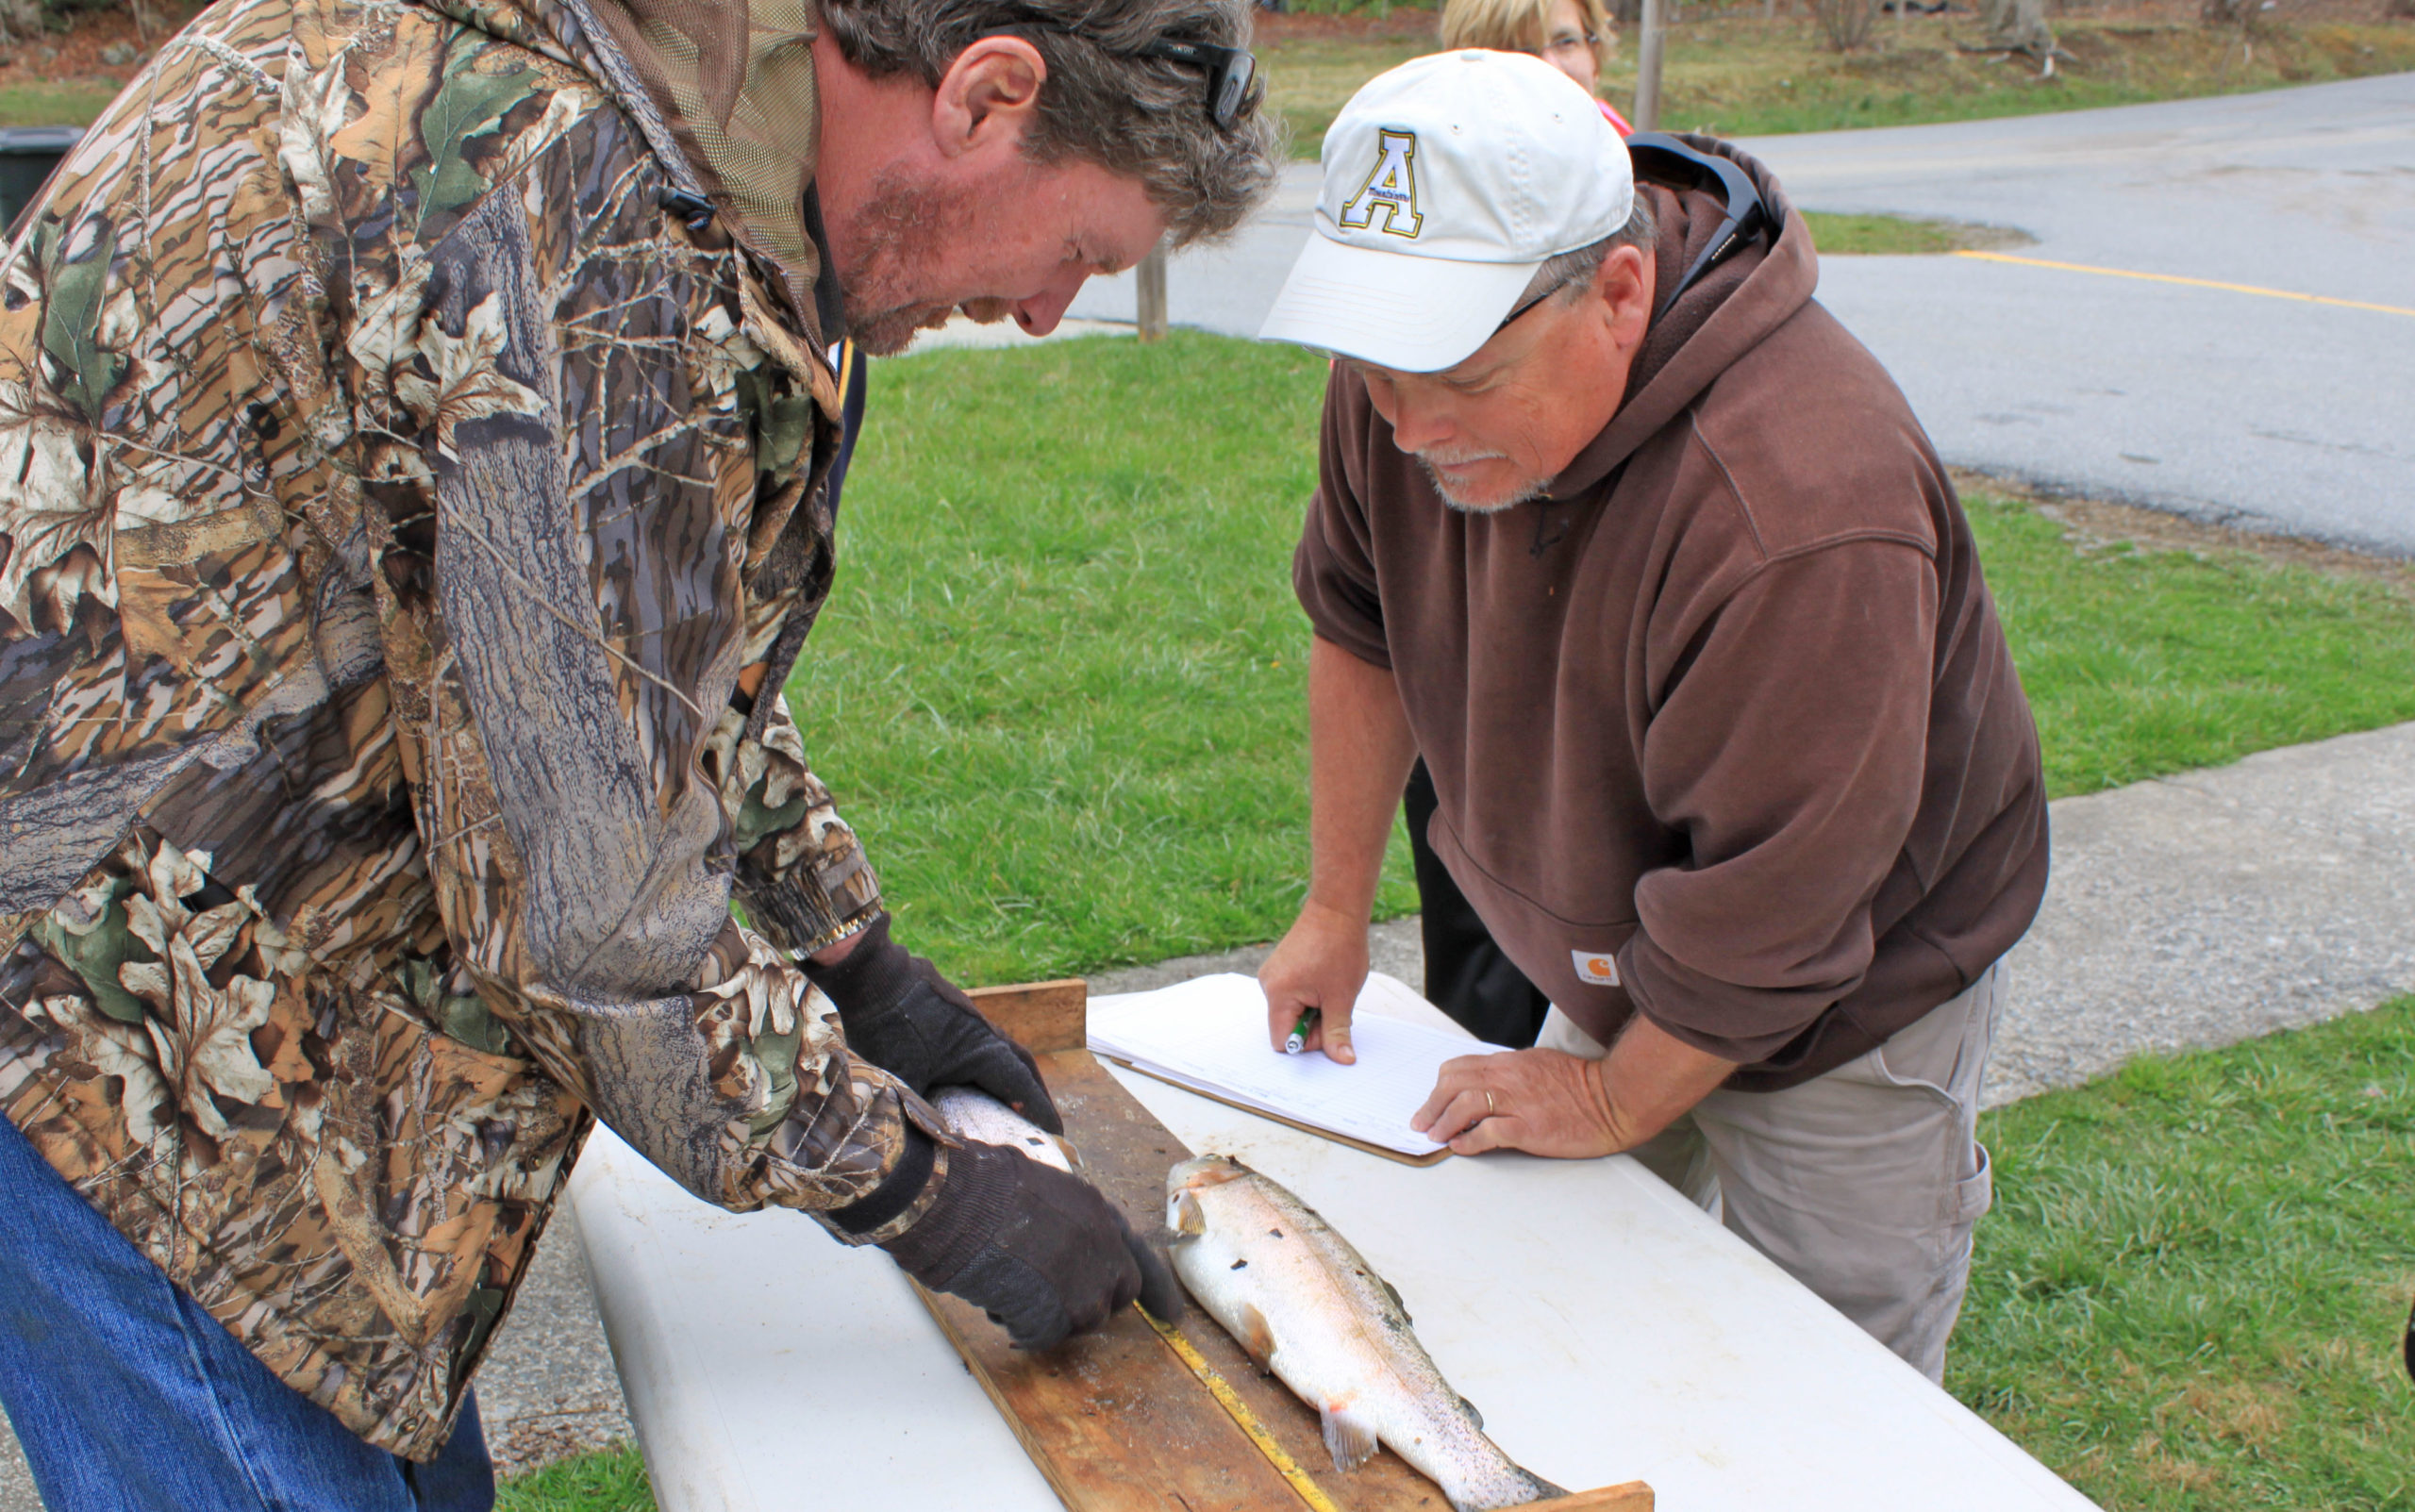 Two Derby officials measure a fish along a tape measure at a table set in the grass.